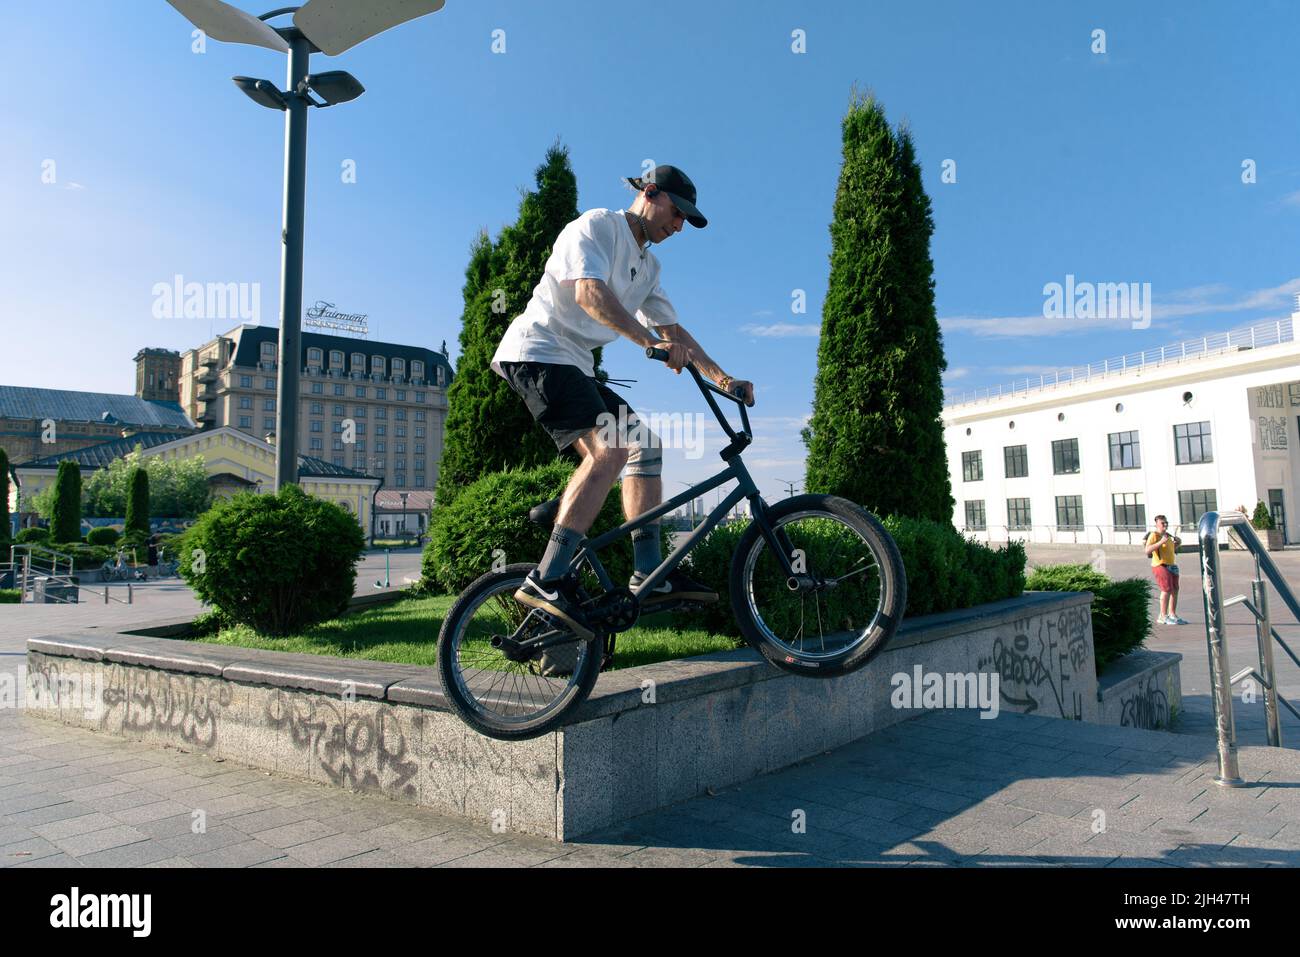 Kyiv, Ukraine - June 15, 2022: Contract Square. Bmx biker performing tricks and stunts training in city park. Jump on bmx bike in action Stock Photo